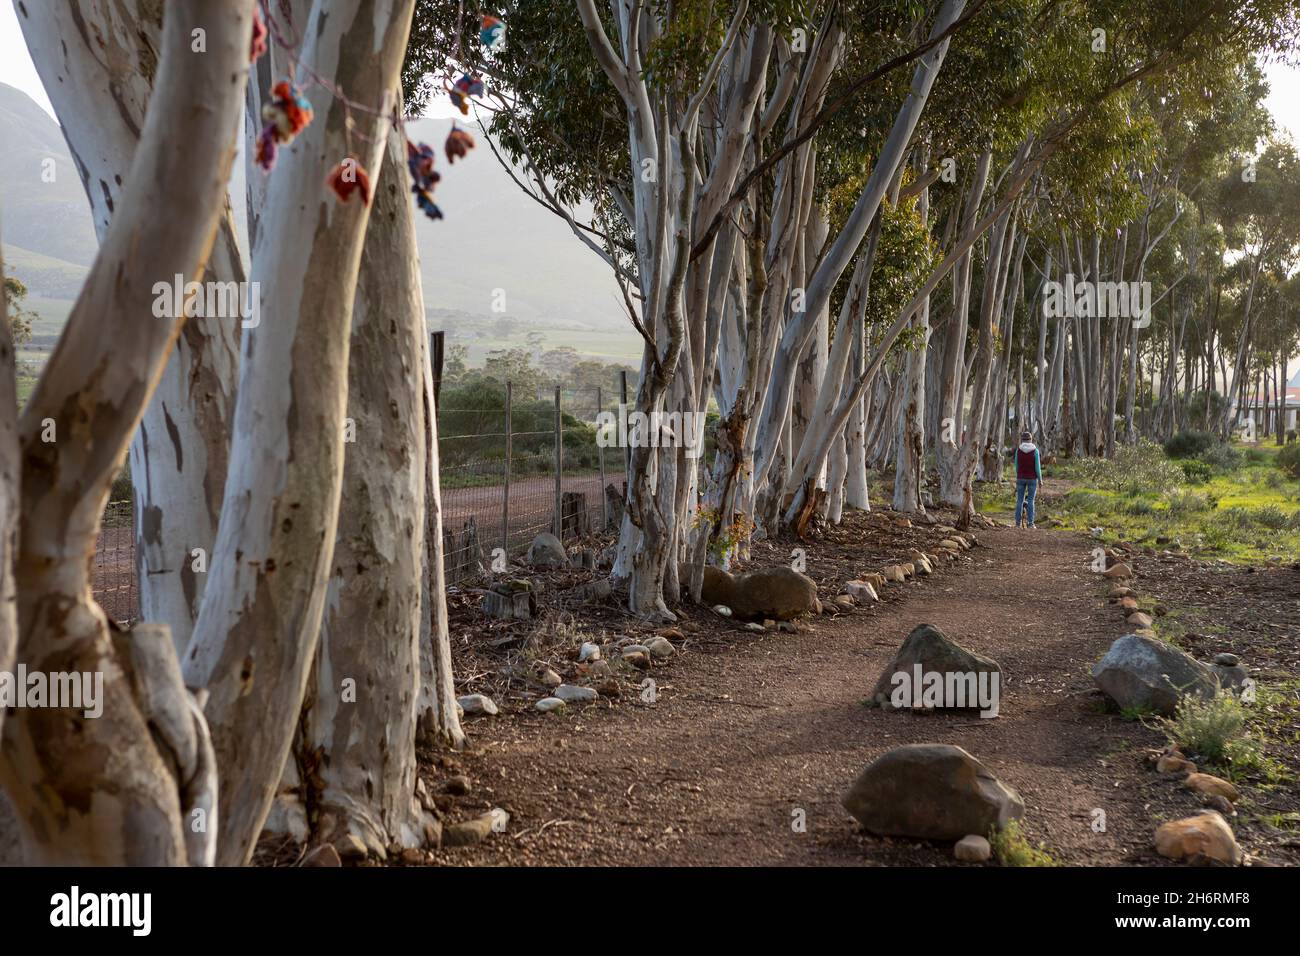 Nature reserve and walking trail, a path through mature blue gum trees and a mountain view, early morning. Stock Photo